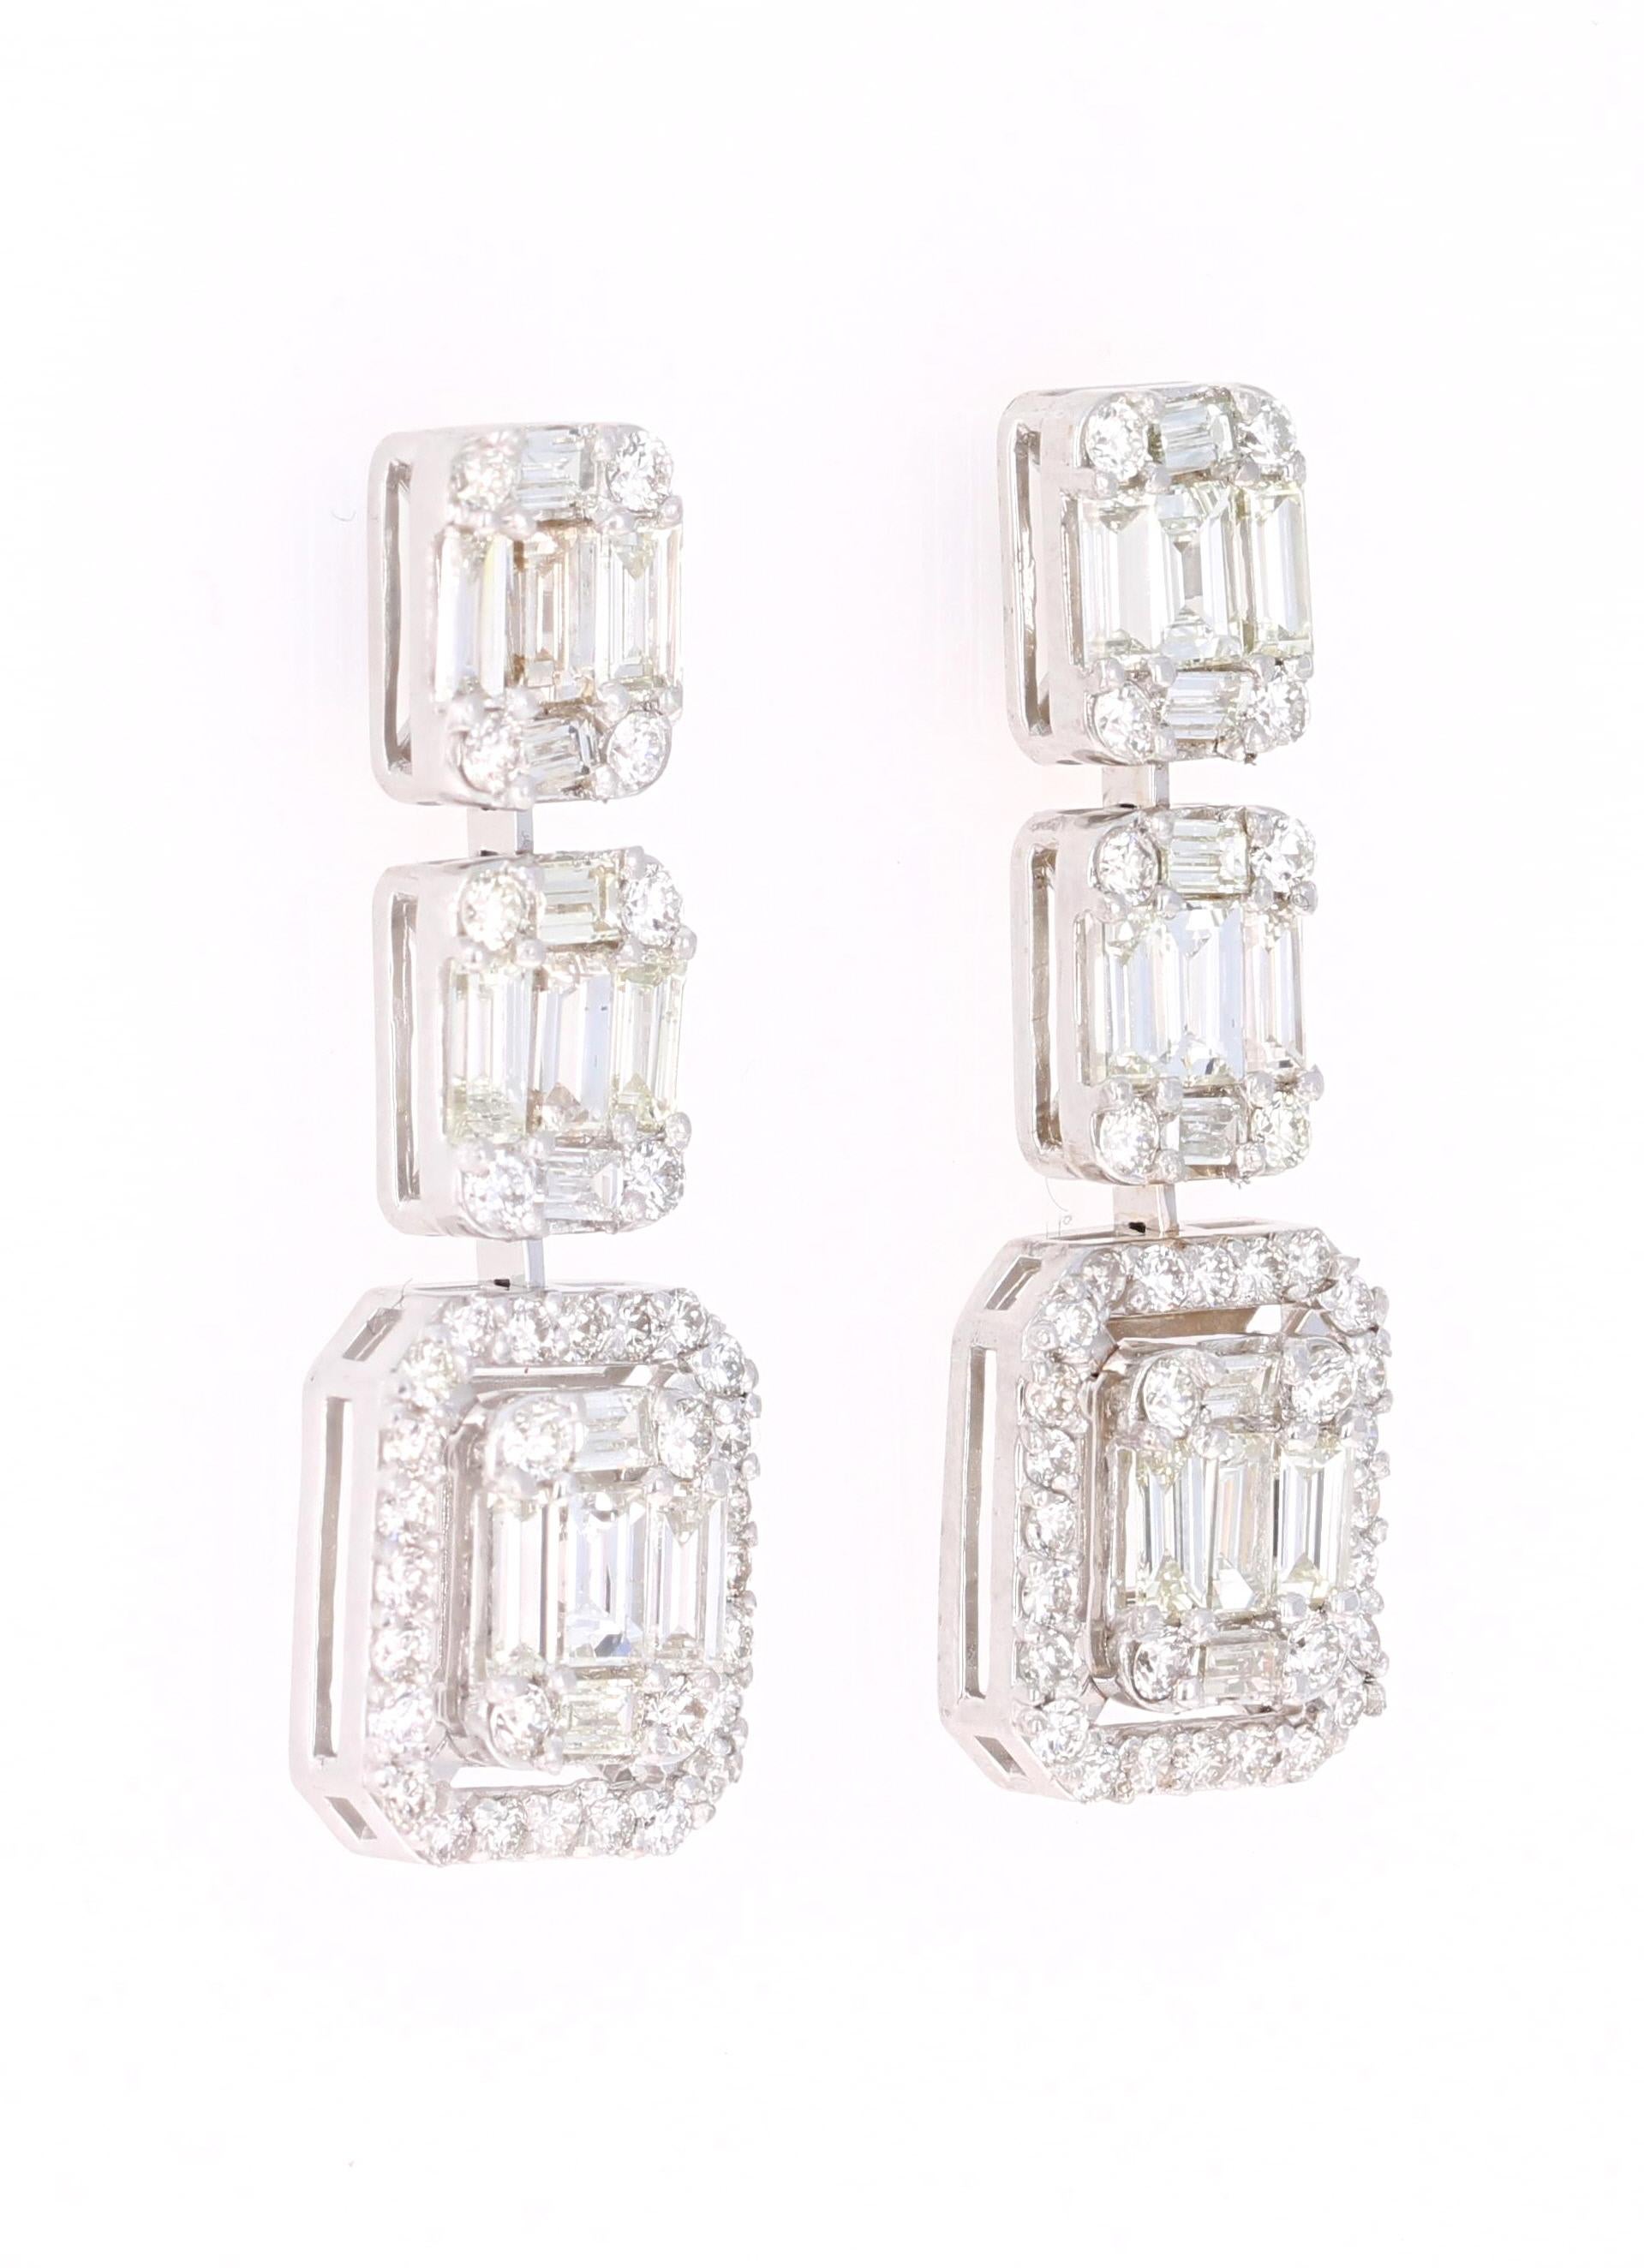 2.39 Carat Baguette Cut and Round Cut Diamonds Dangling 18 Karat White Gold Earrings

These unique & intricate design earrings are sure to make a stunning statement! There are 30 Baguette Cut Diamonds that weigh 2.01 Carats and 24 Round Cut Diamonds